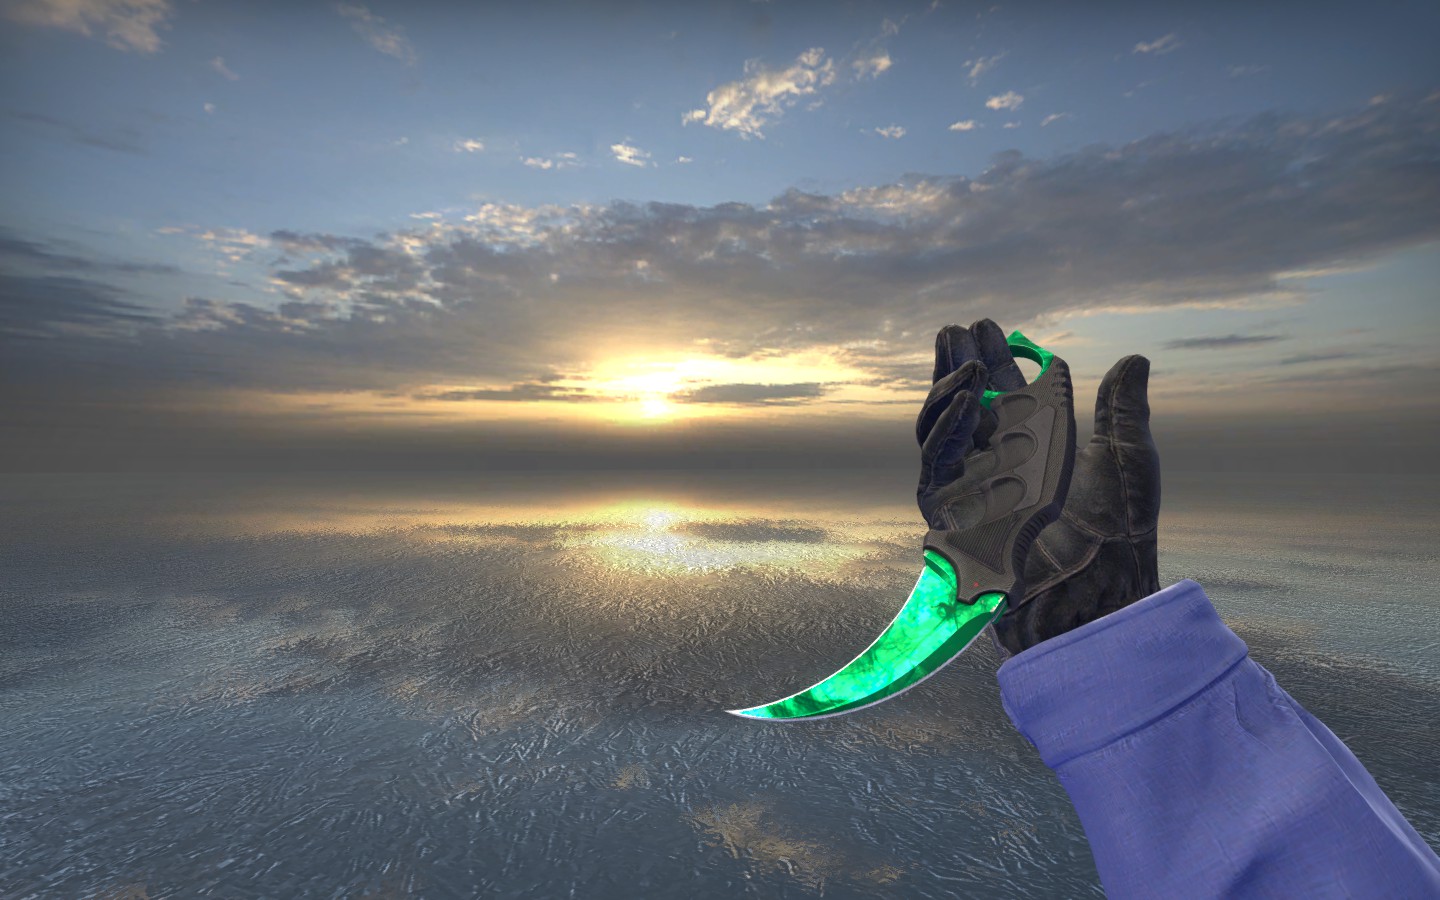 Karambit Emerald wallpaper created by Tw1ce CSGOWallpapers com